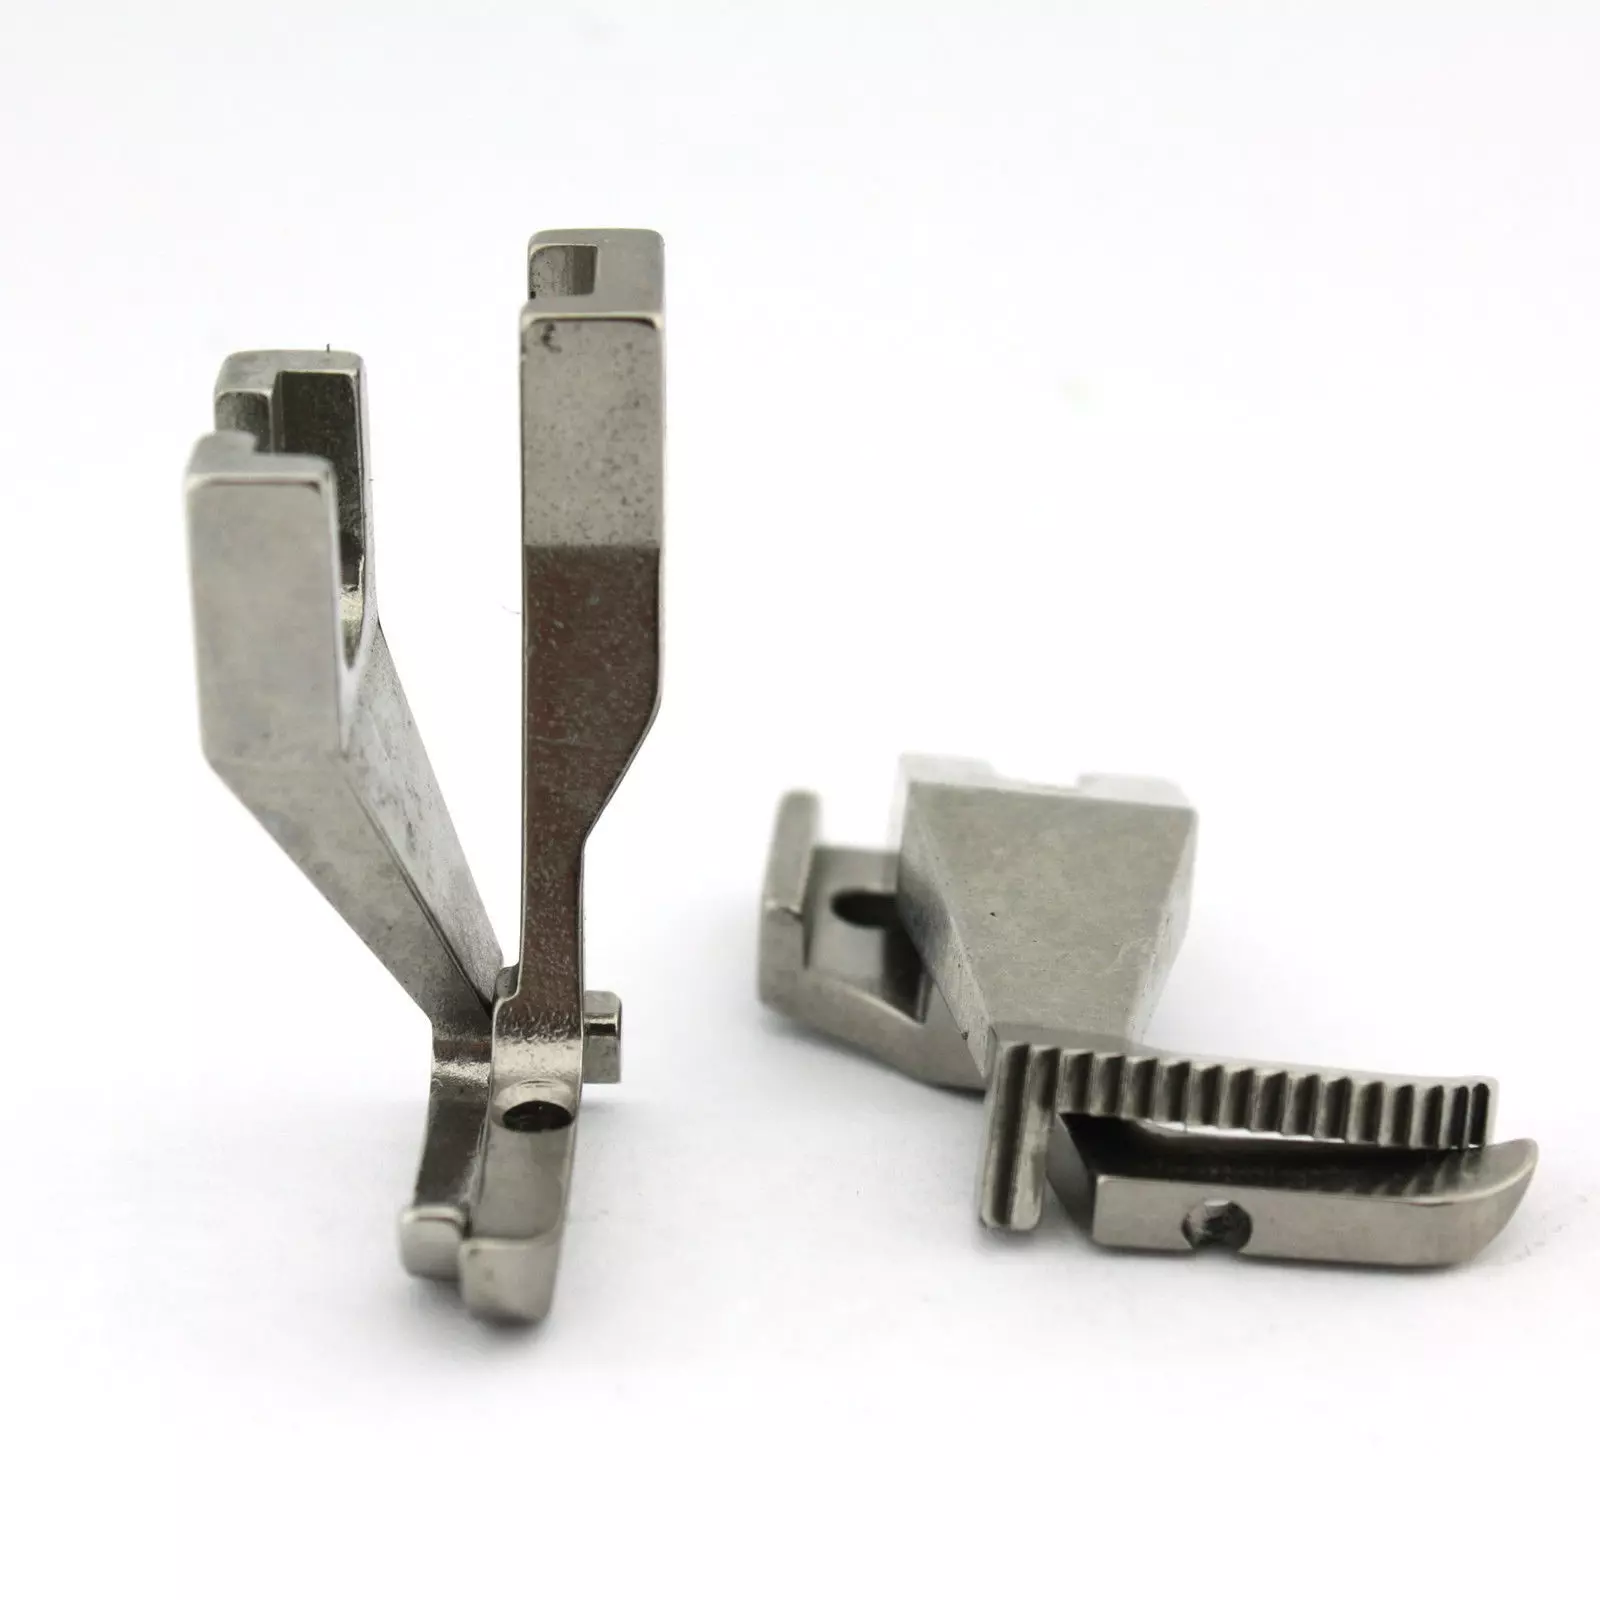 Walking and Presser Foot-40021791 + 40022772